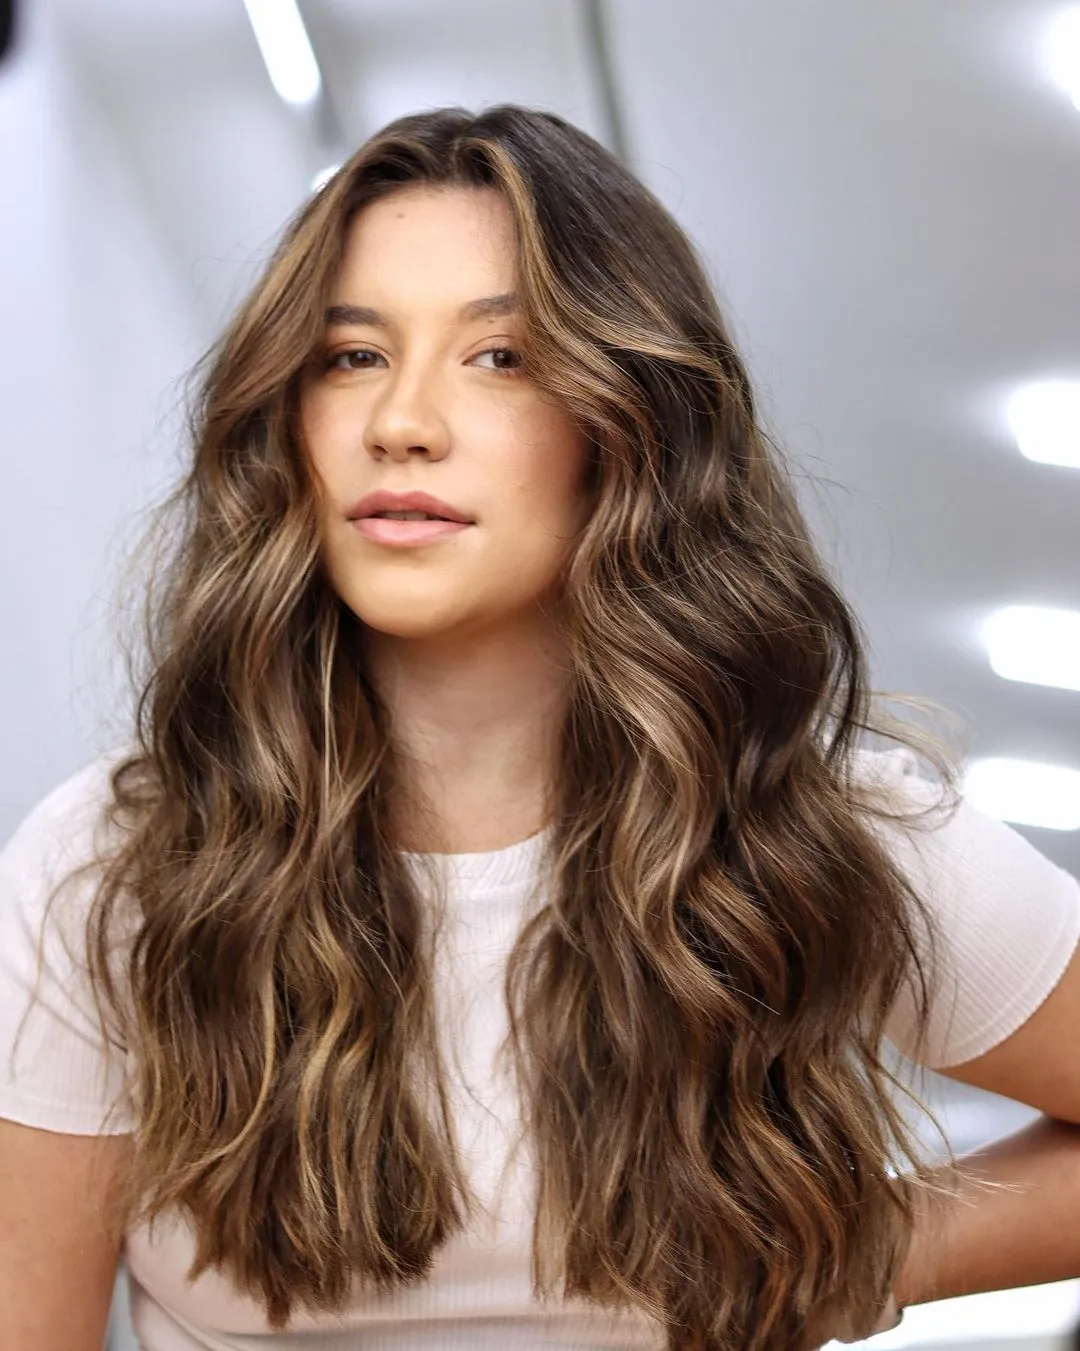 cinamon-hair-color-on-natural-waves-and-olive-skin